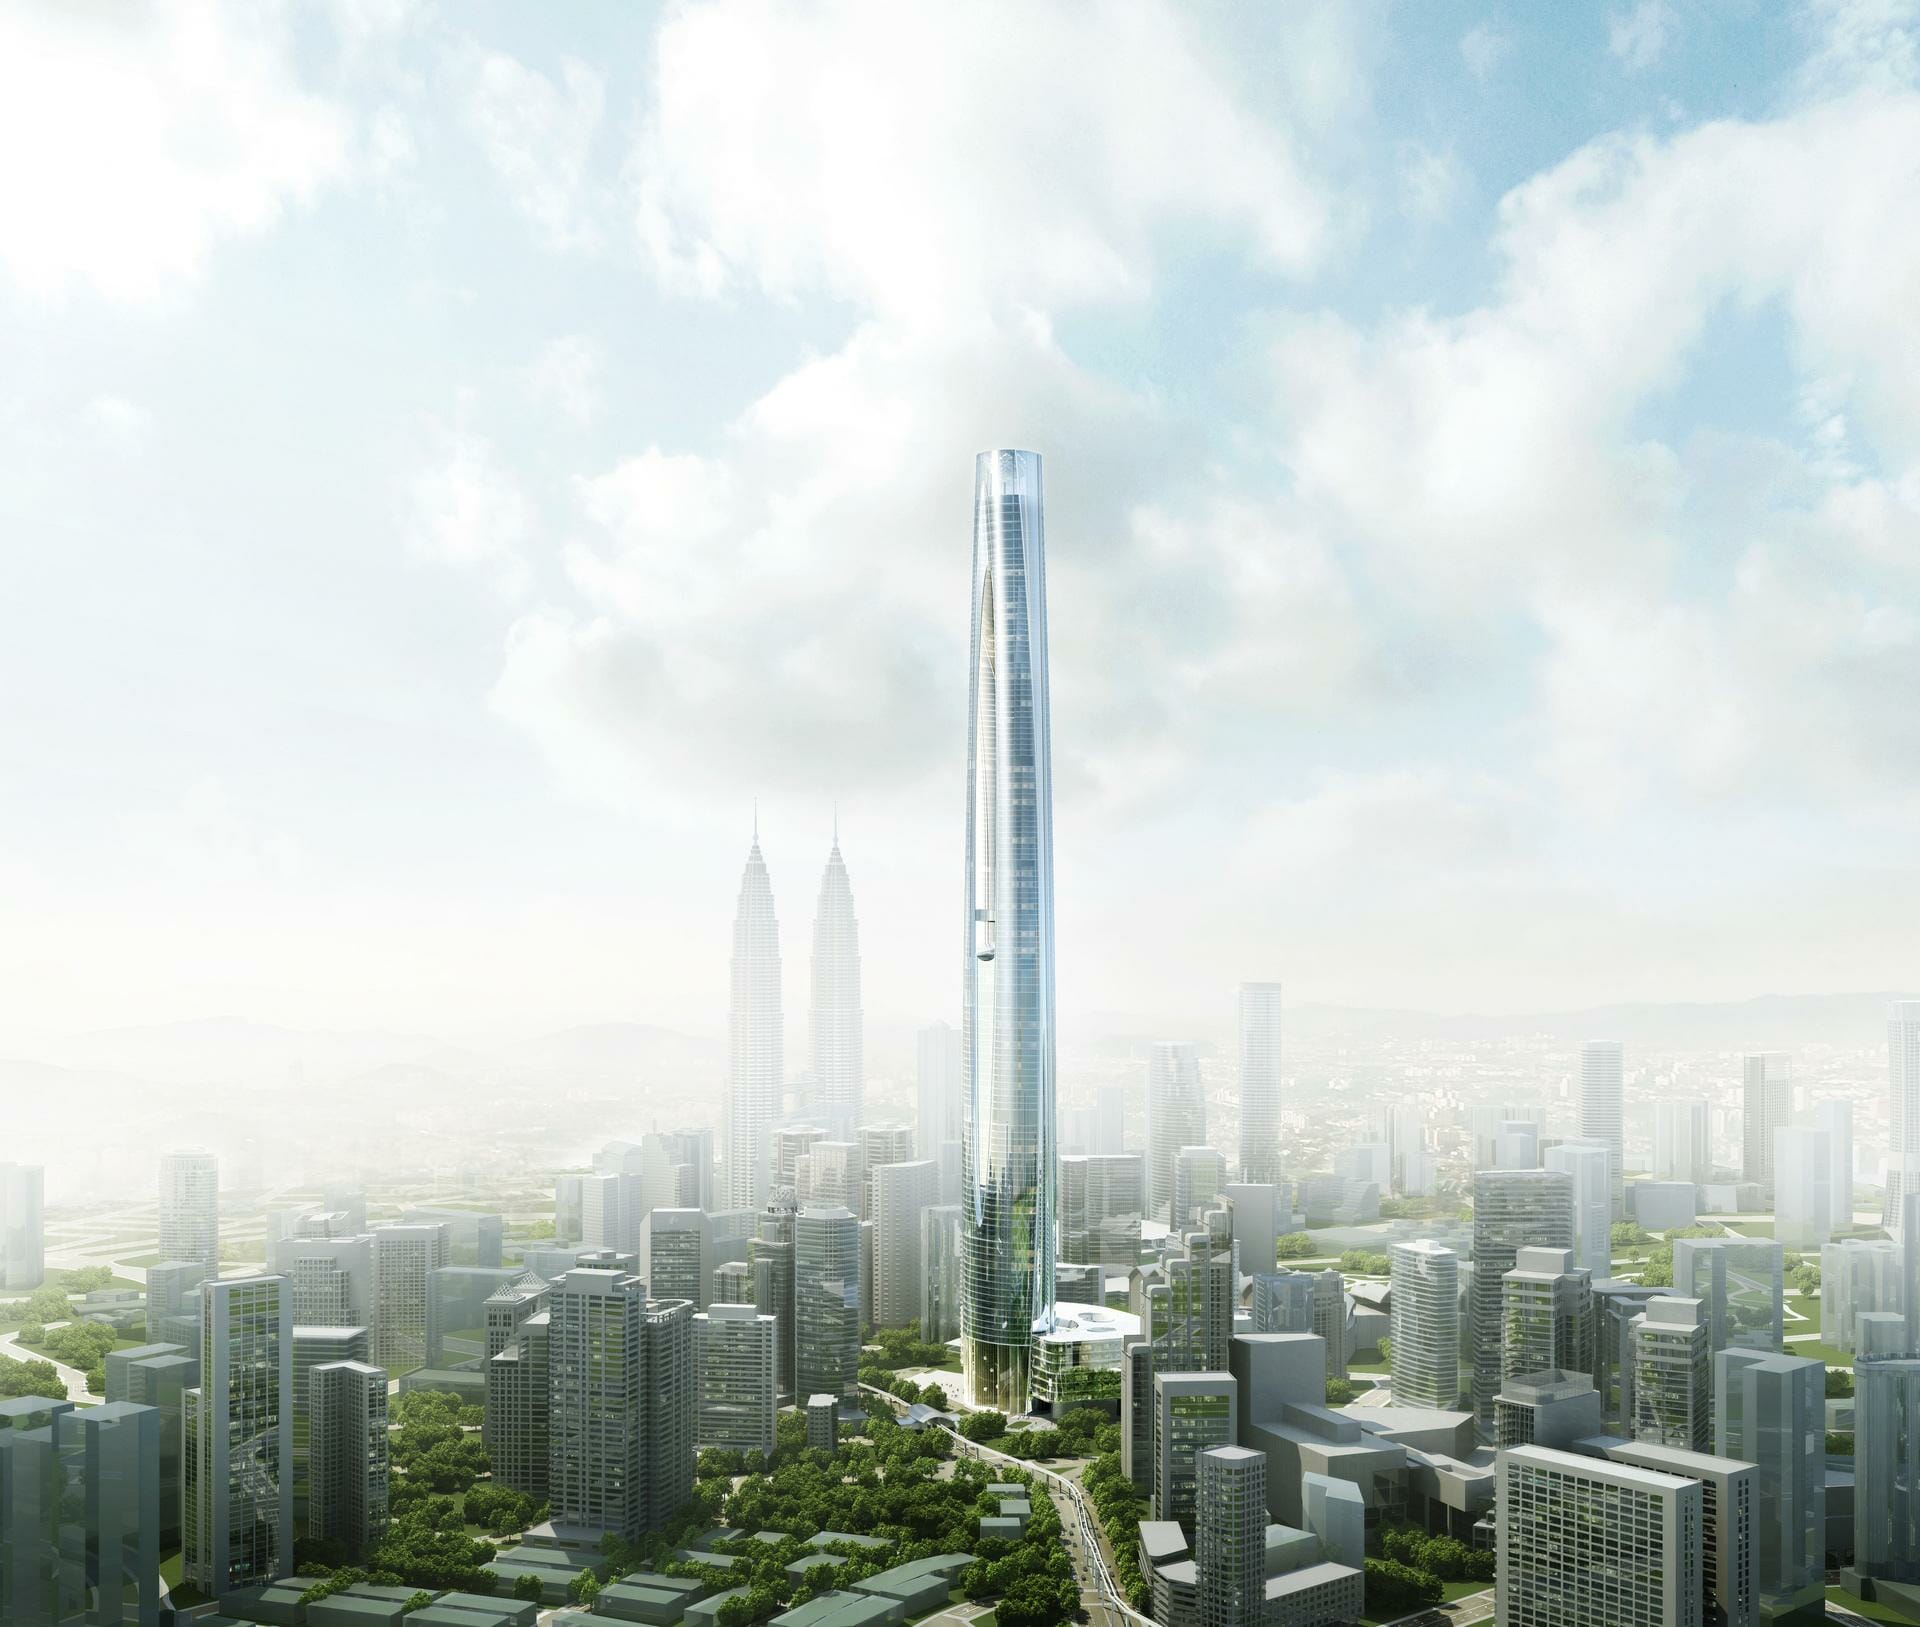 But netizens question if there is really a need for another megatower project, following Merdeka 118. Image credit: Woods Bagot